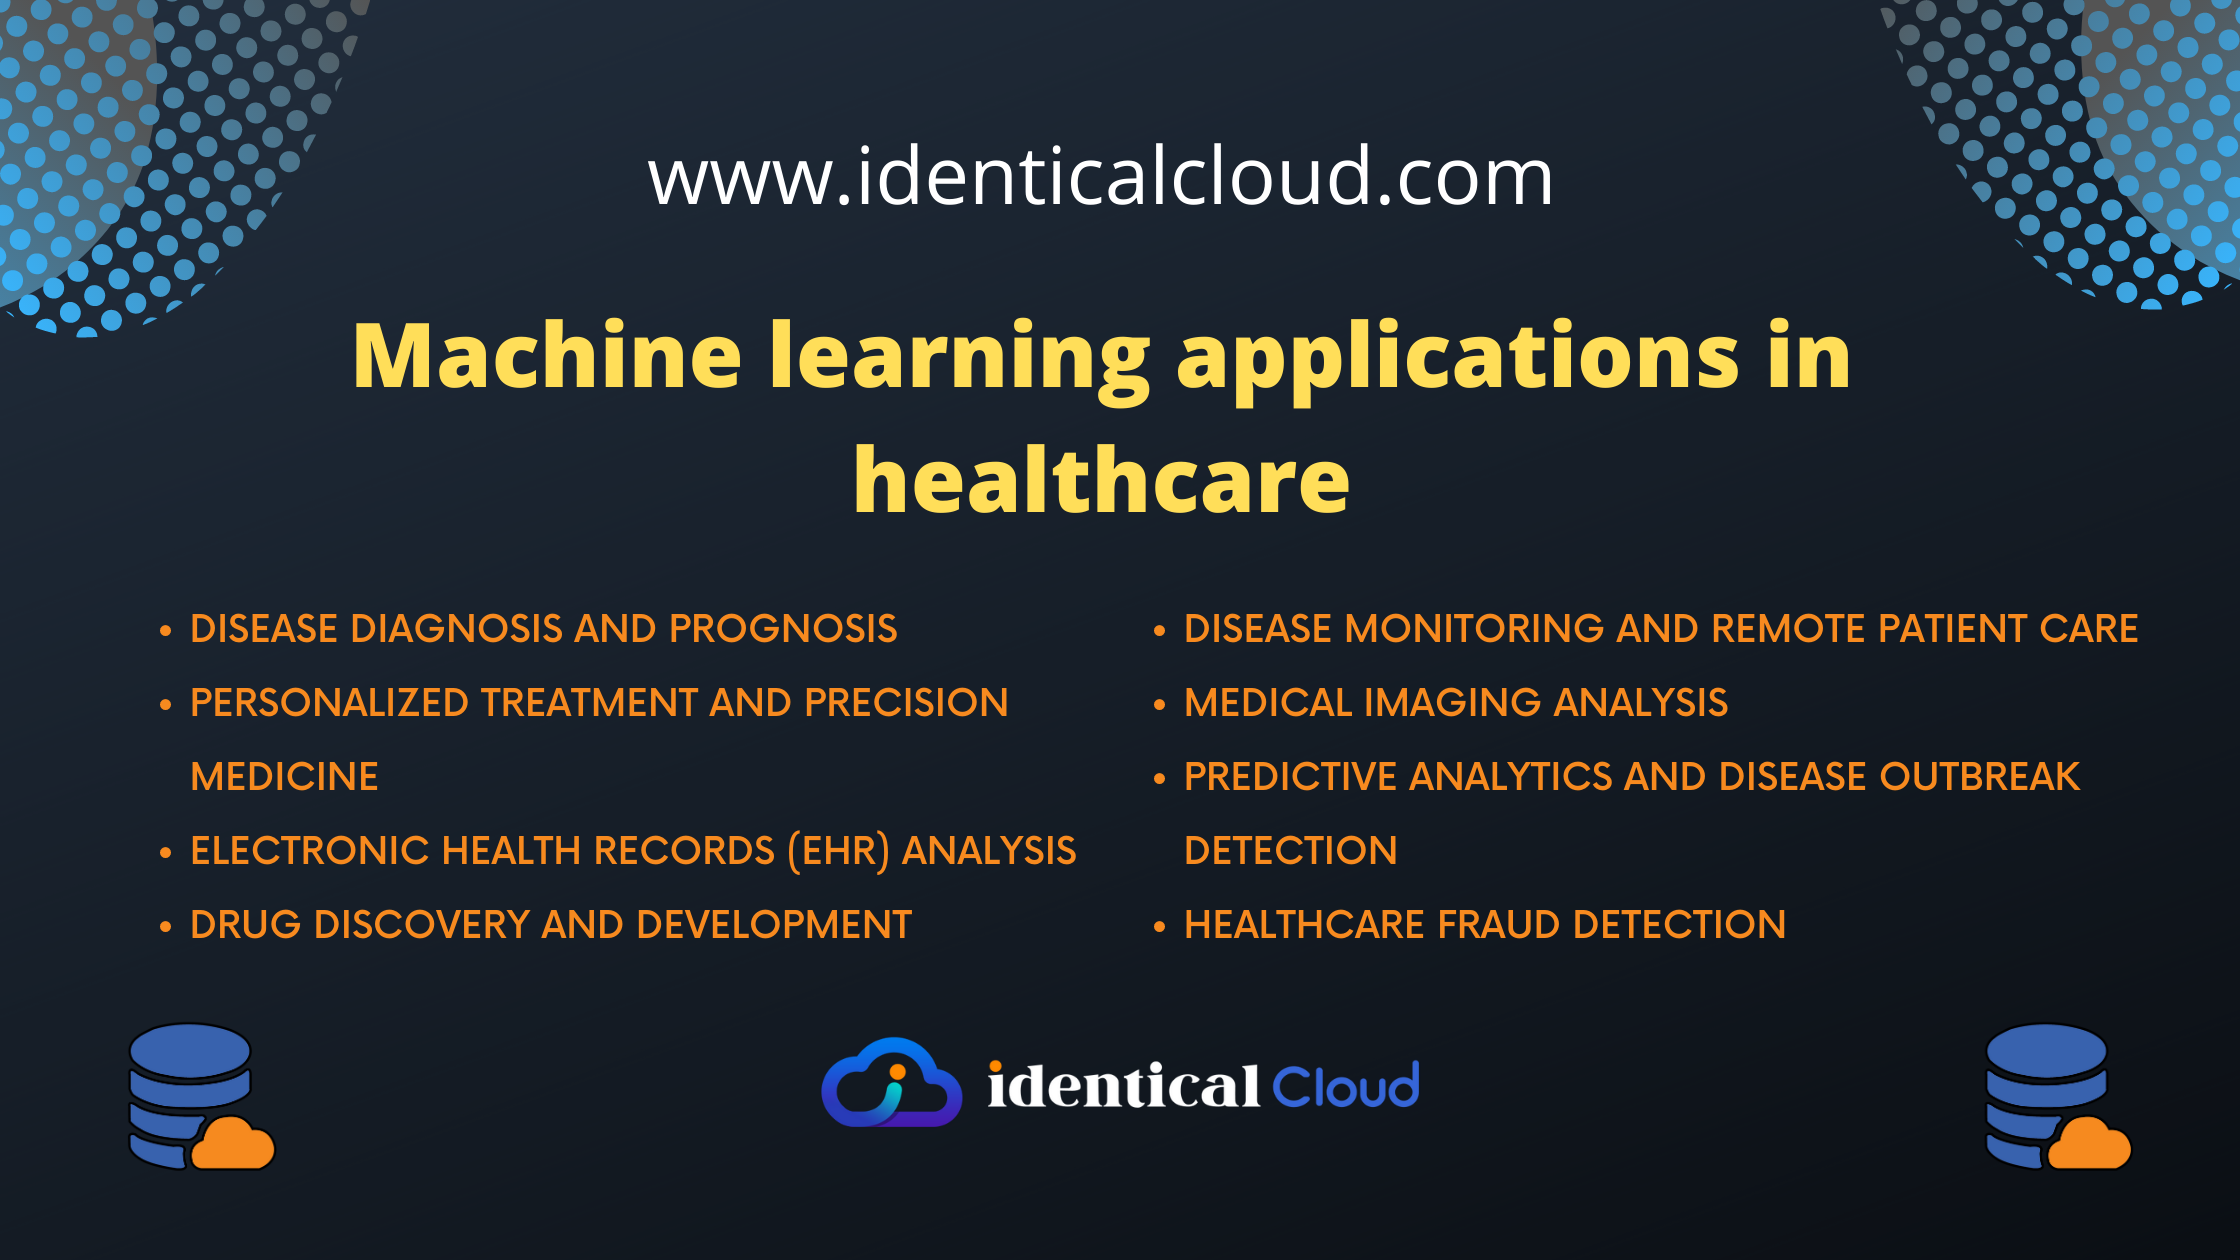 Machine learning applications in healthcare - identicalcloud.com